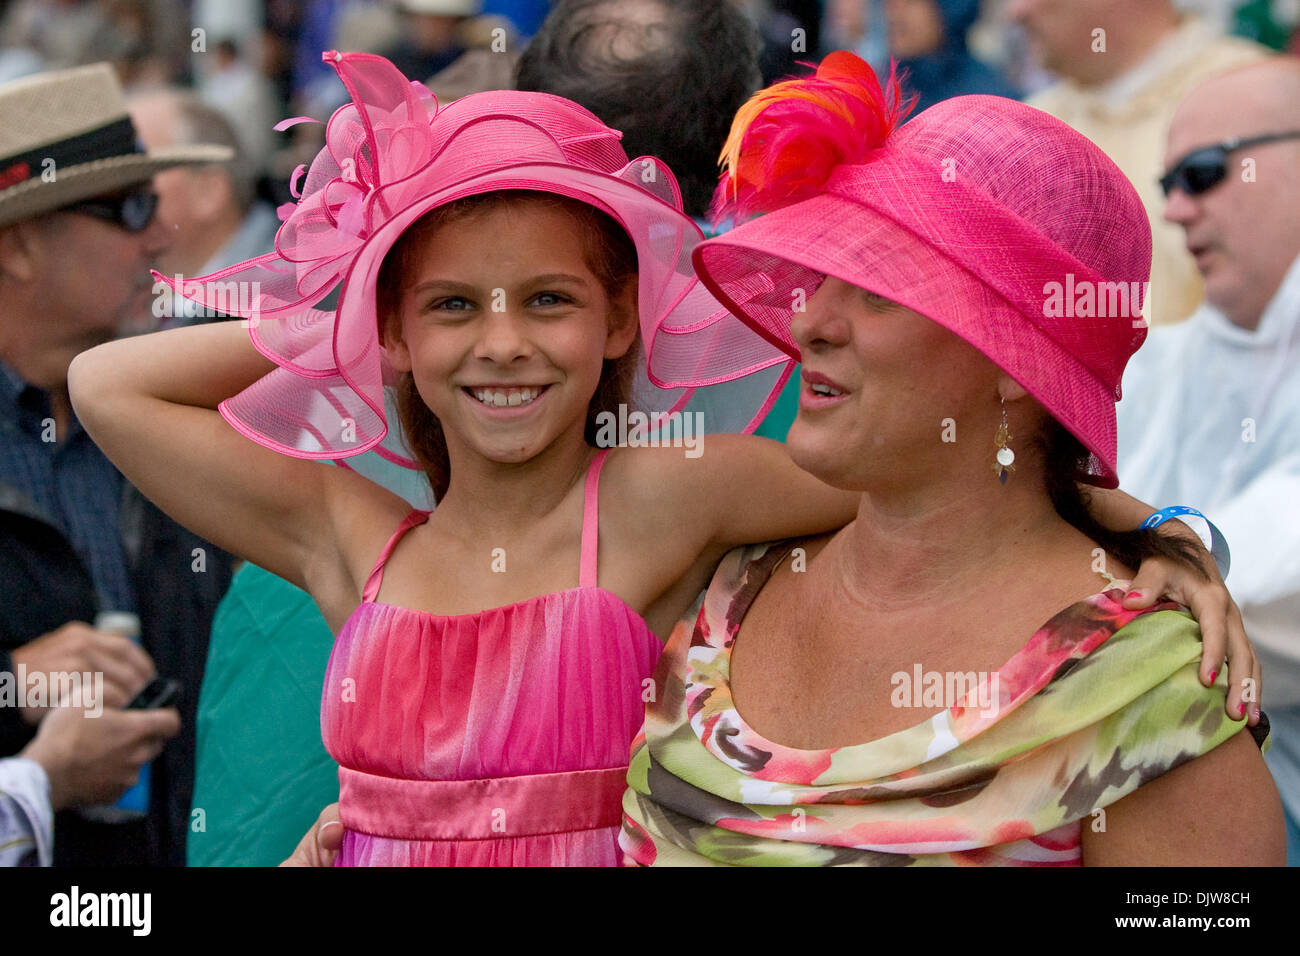 01 May 2010: Mother and daughter display their fancy hats at the 136th running of the Kentucky Derby.  Jockey Calvin Borel aboard Super Saver (4) crosses the finish line to win the 136th running of the Kentucky Derby before a crowd of 155,084 at Churchill Downs in Louisville, Ky. .Mandatory Credit: Frank Jansky / Southcreek Global (Credit Image: © Frank Jansky/Southcreek Global/ZUM Stock Photo